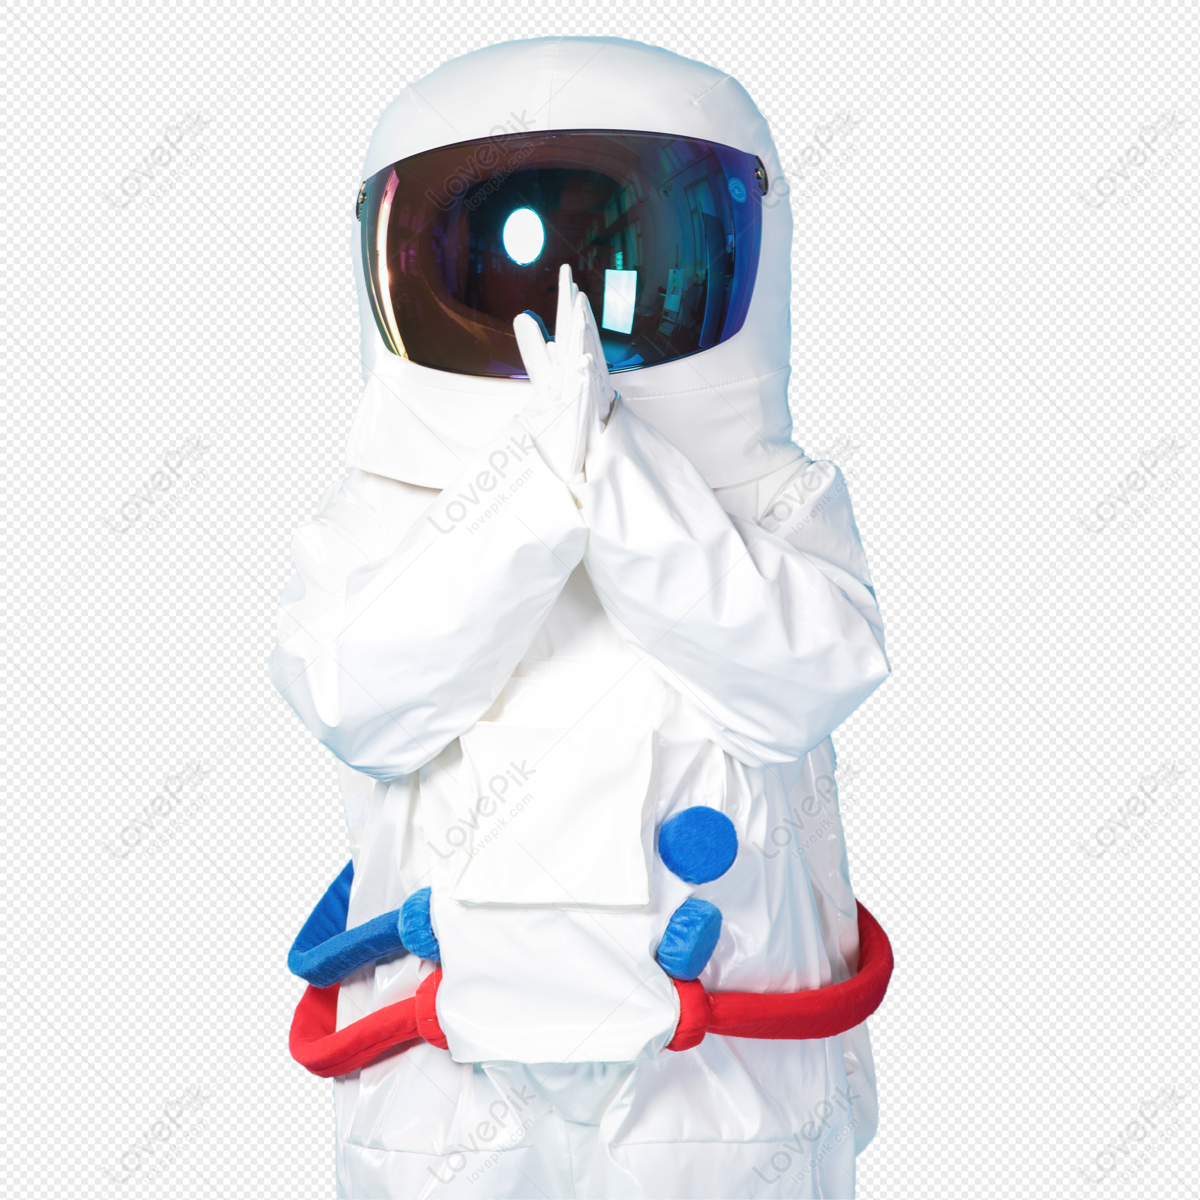 Children Wear Spacesuit PNG Picture And Clipart Image For Free Download ...